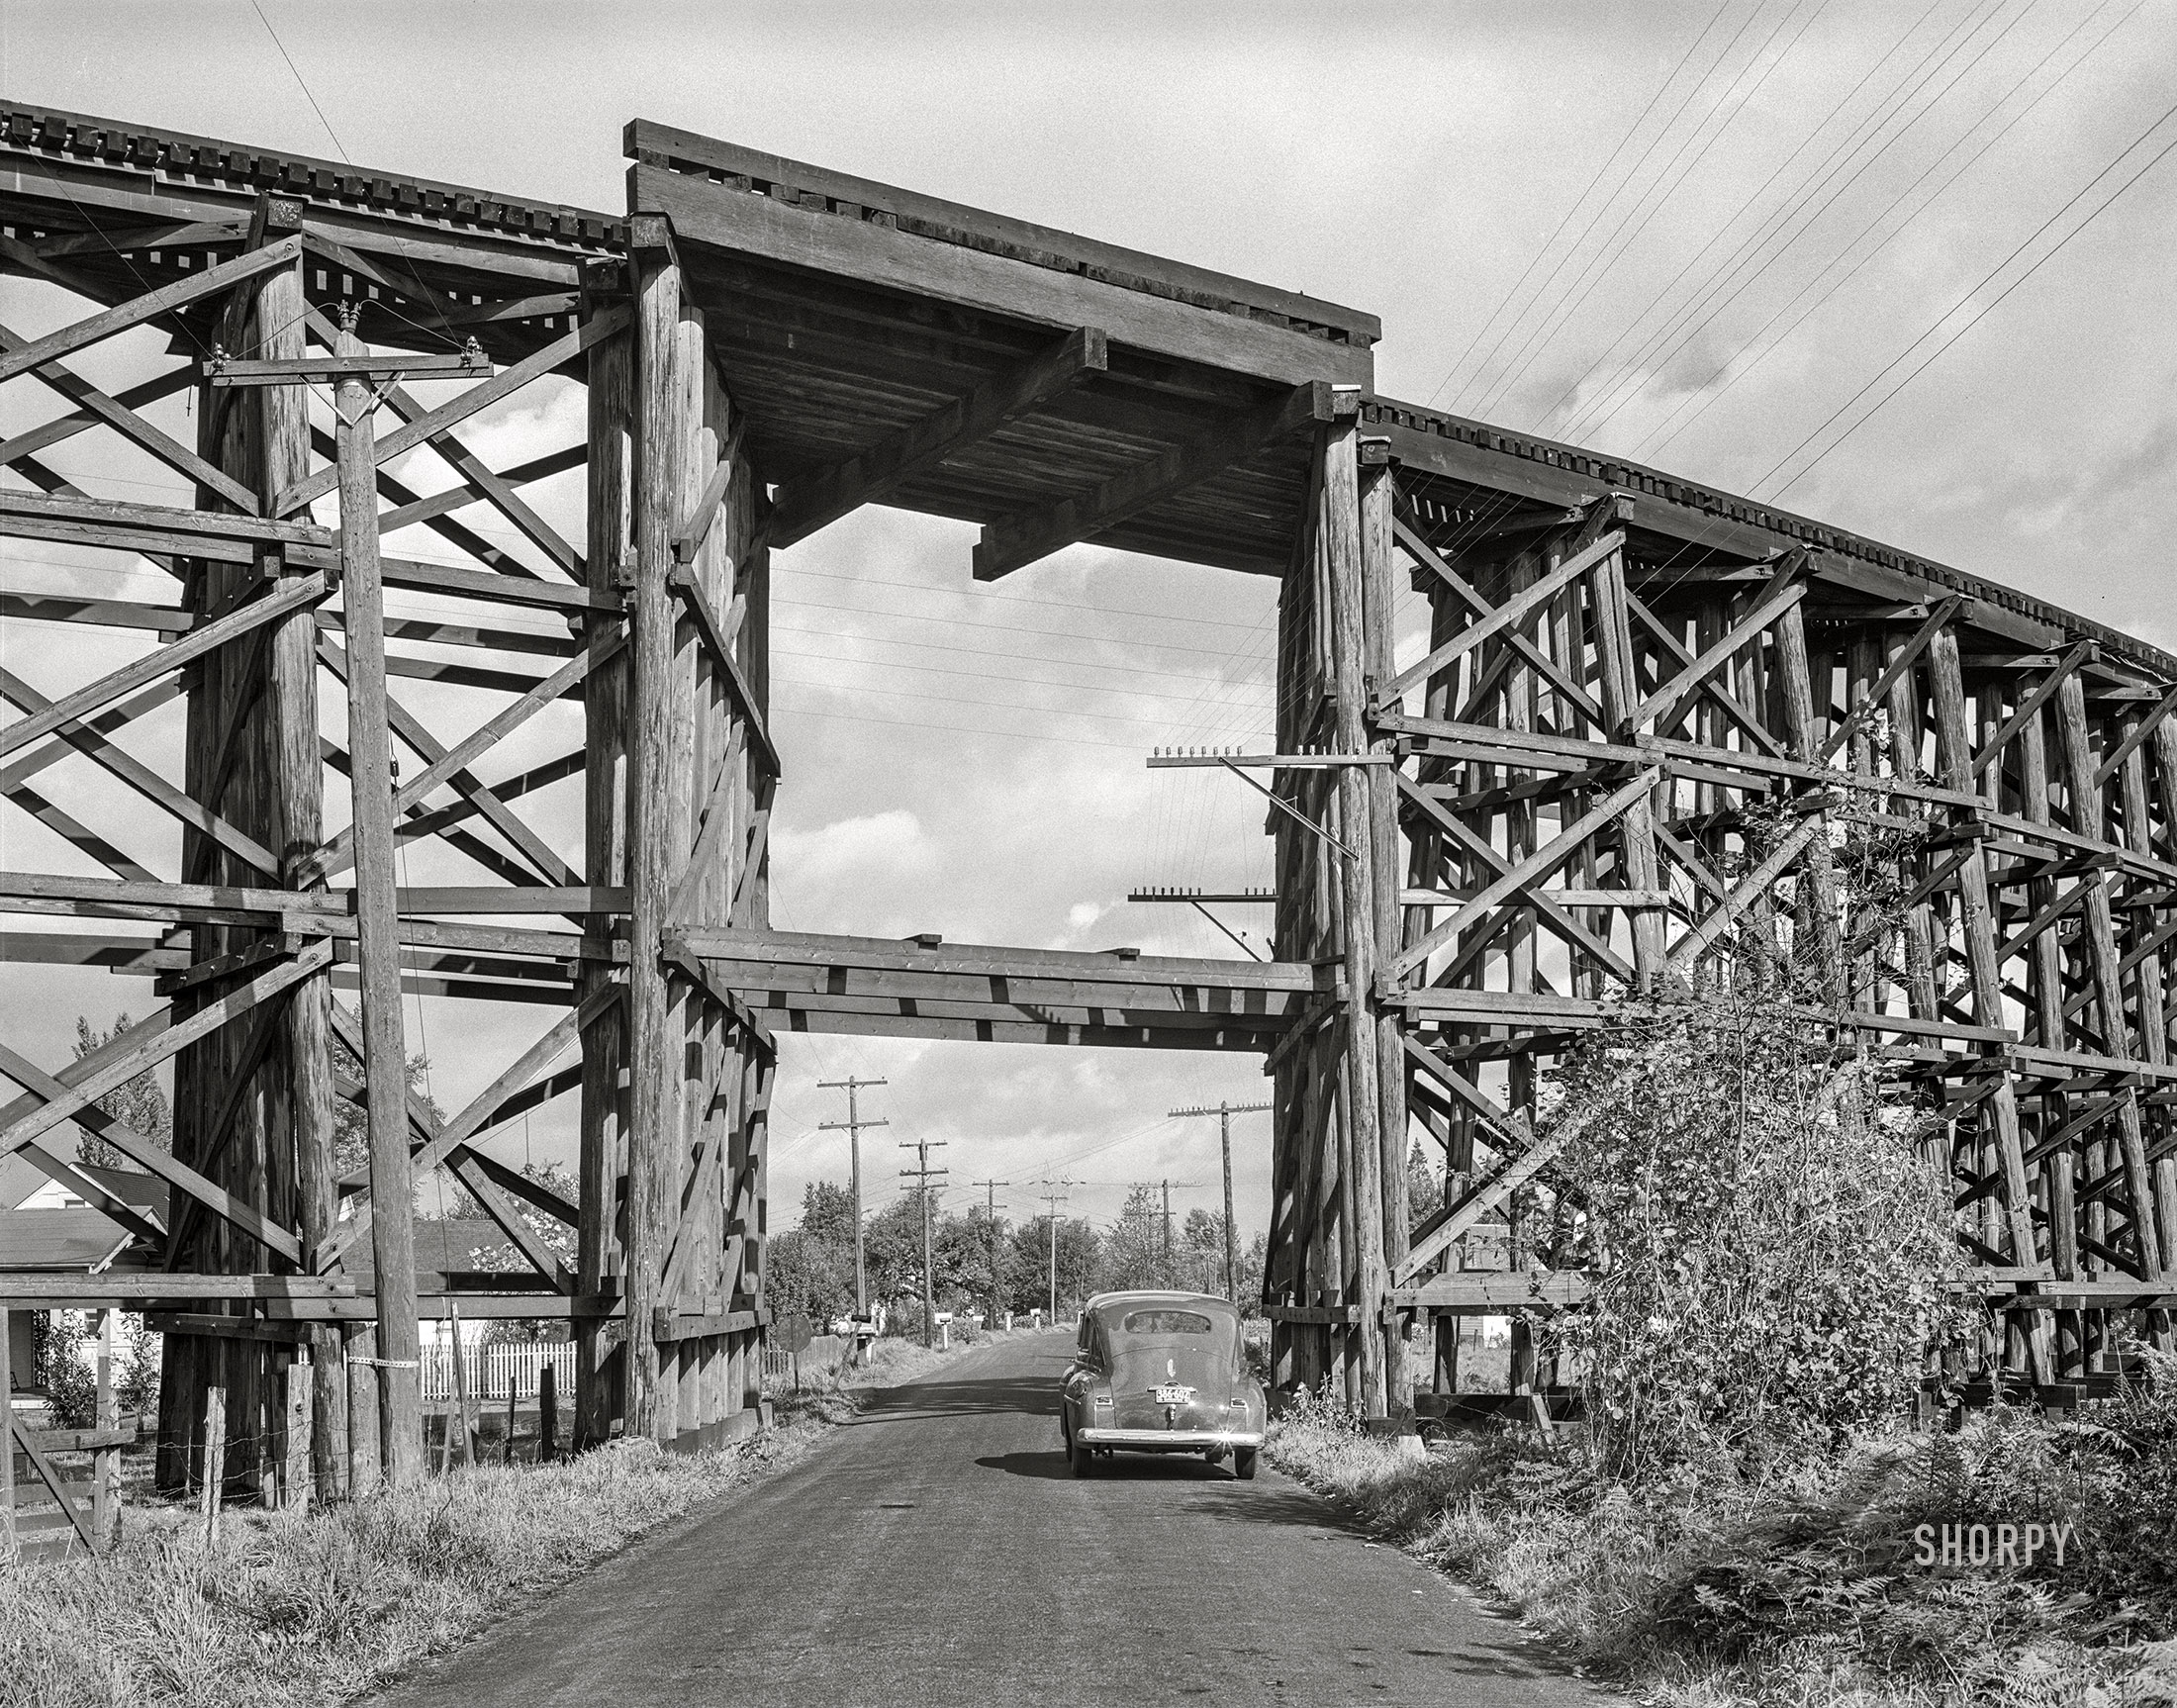 October 1941. Cowlitz County, Washington. "Holdings and operations of the Long Bell Lumber Company. Highway goes under wooden trestle for railroad." Medium format acetate negative by Russell Lee for the Farm Security Administration. View full size.